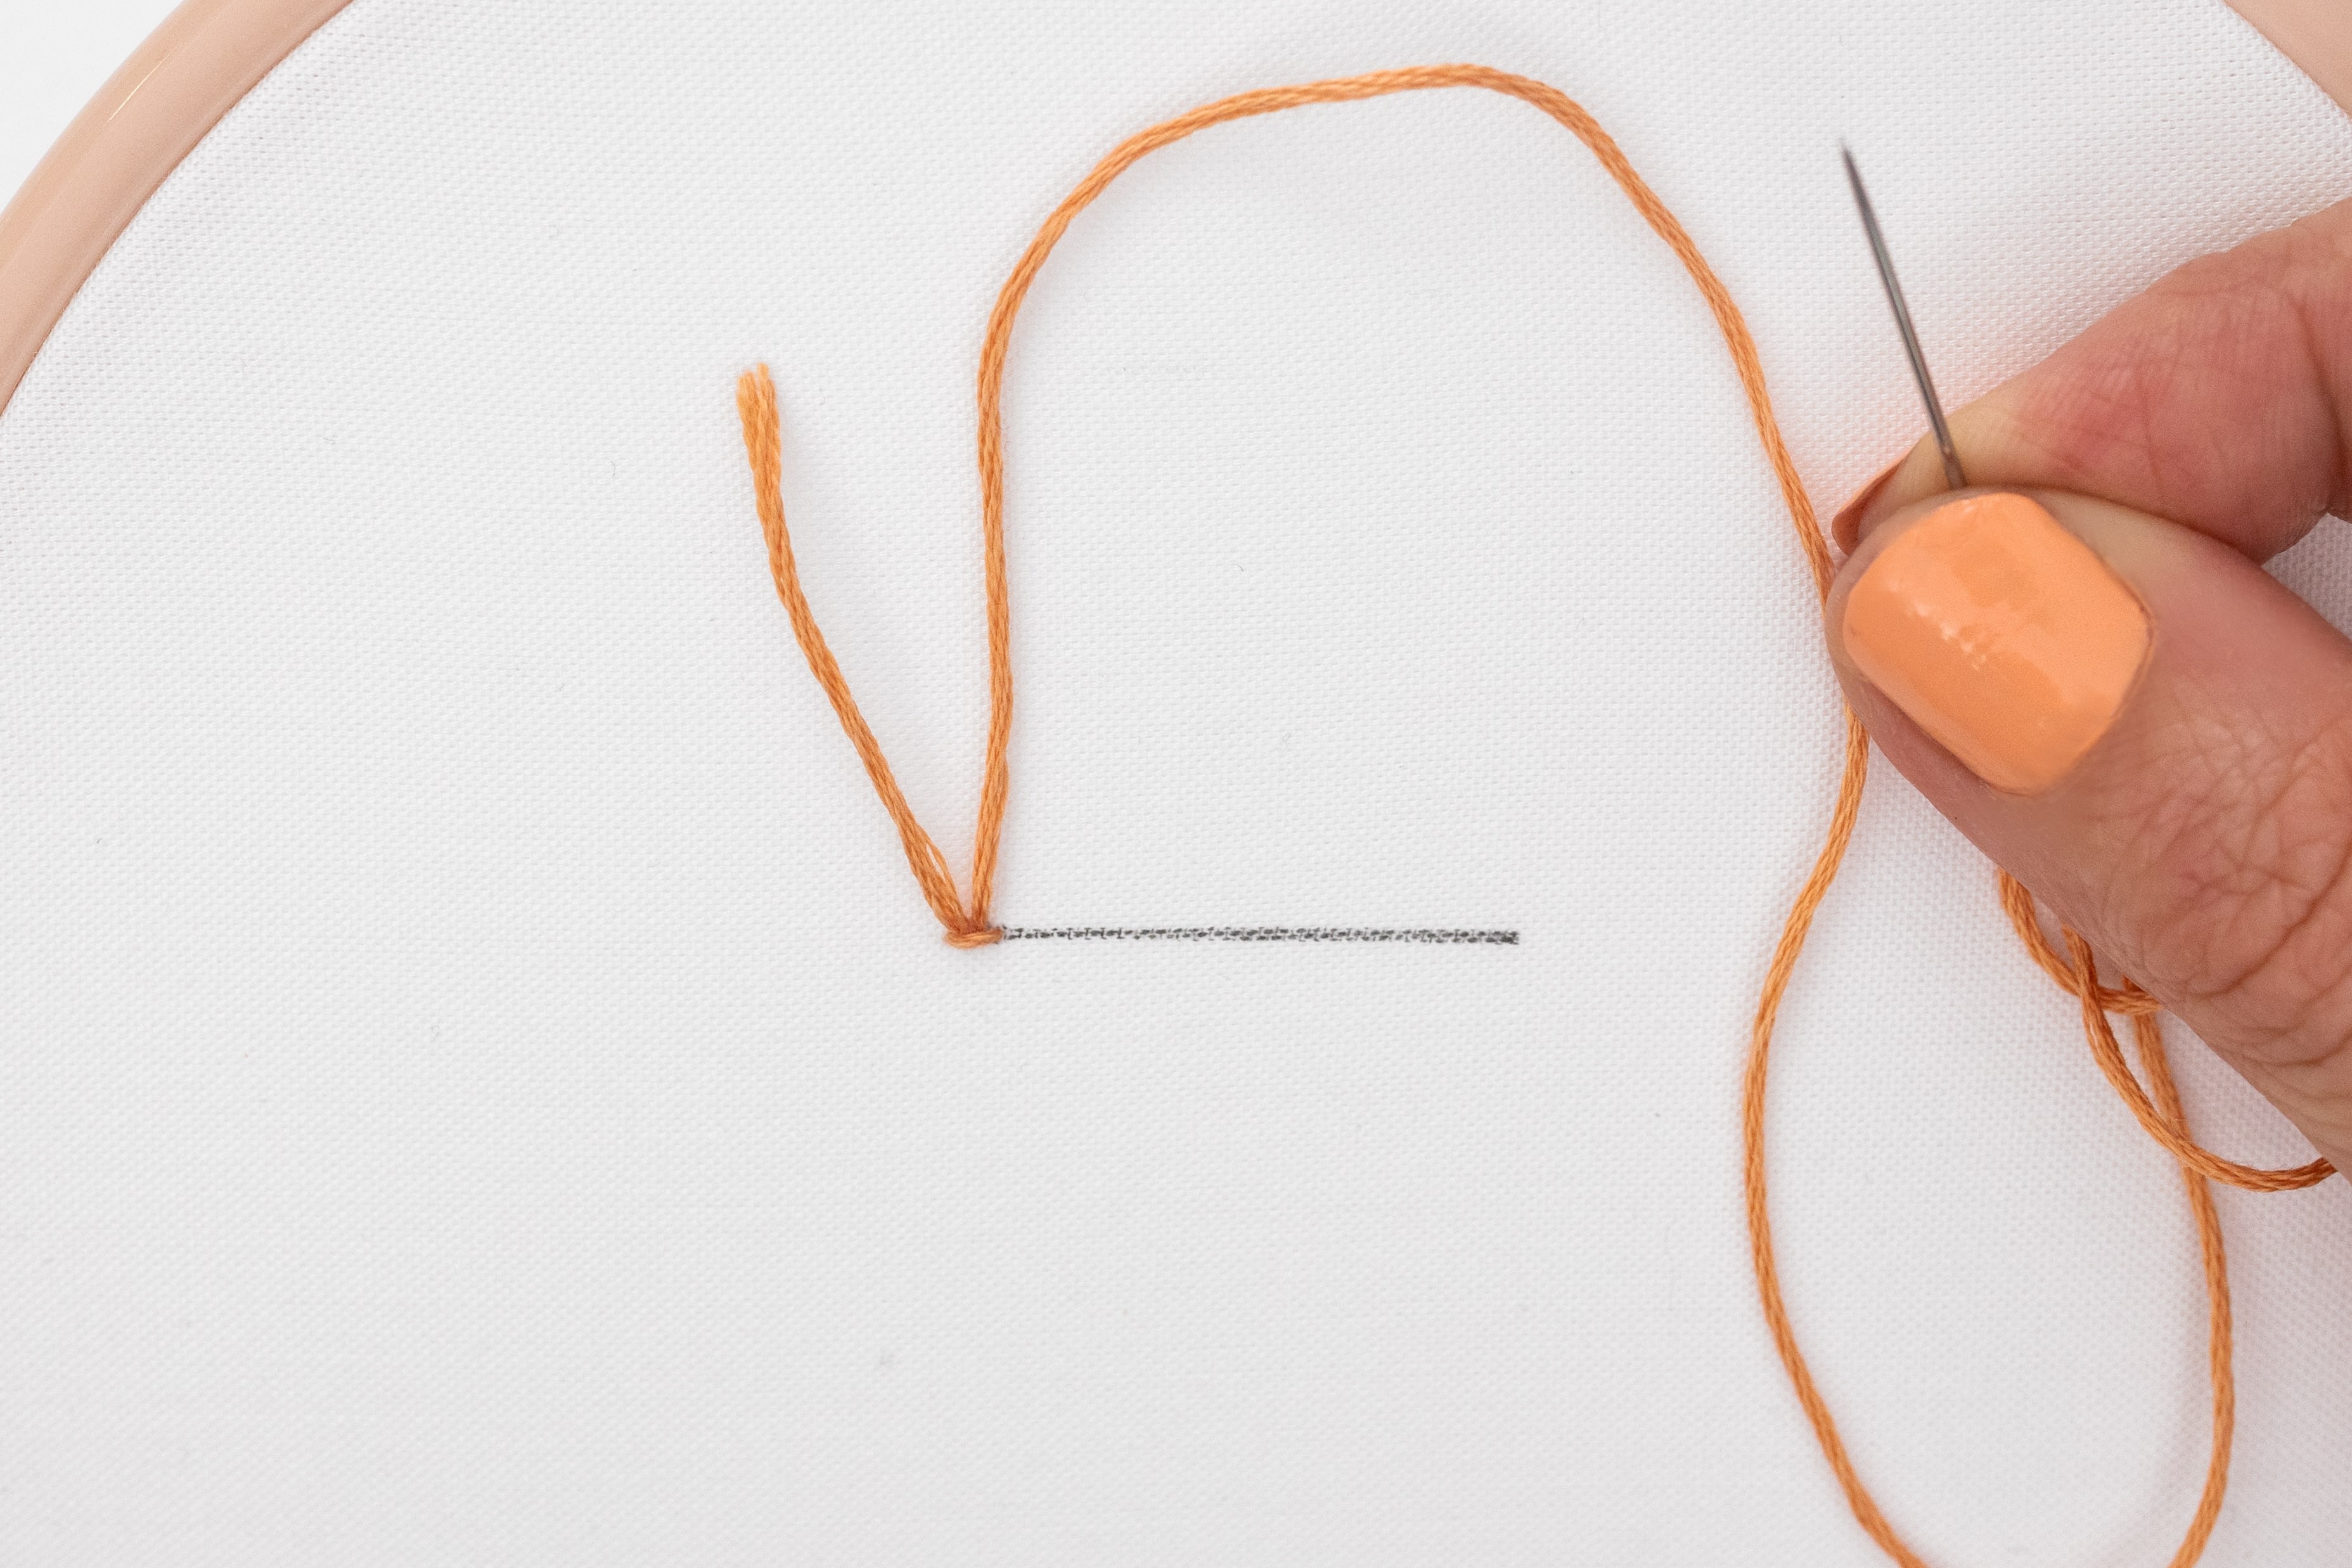 A hand holds up the thread to show that a tidy stitch has been created, holding the tail in place.